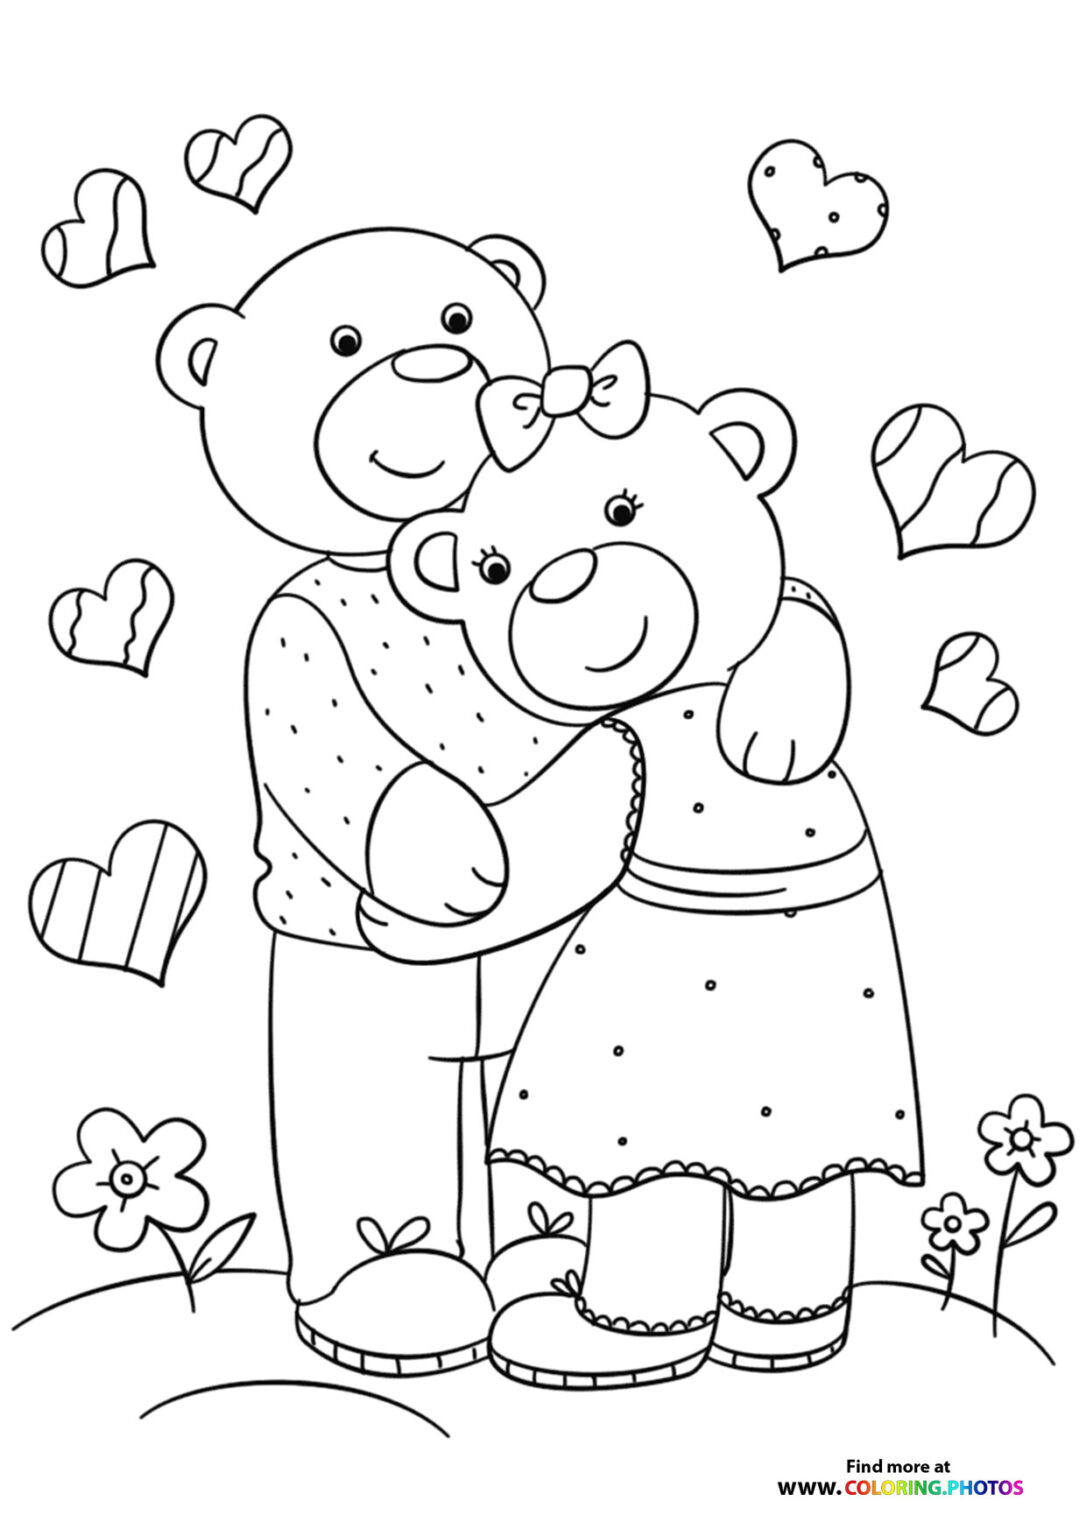 Valentines animals - Coloring Pages for kids | Free and easy print